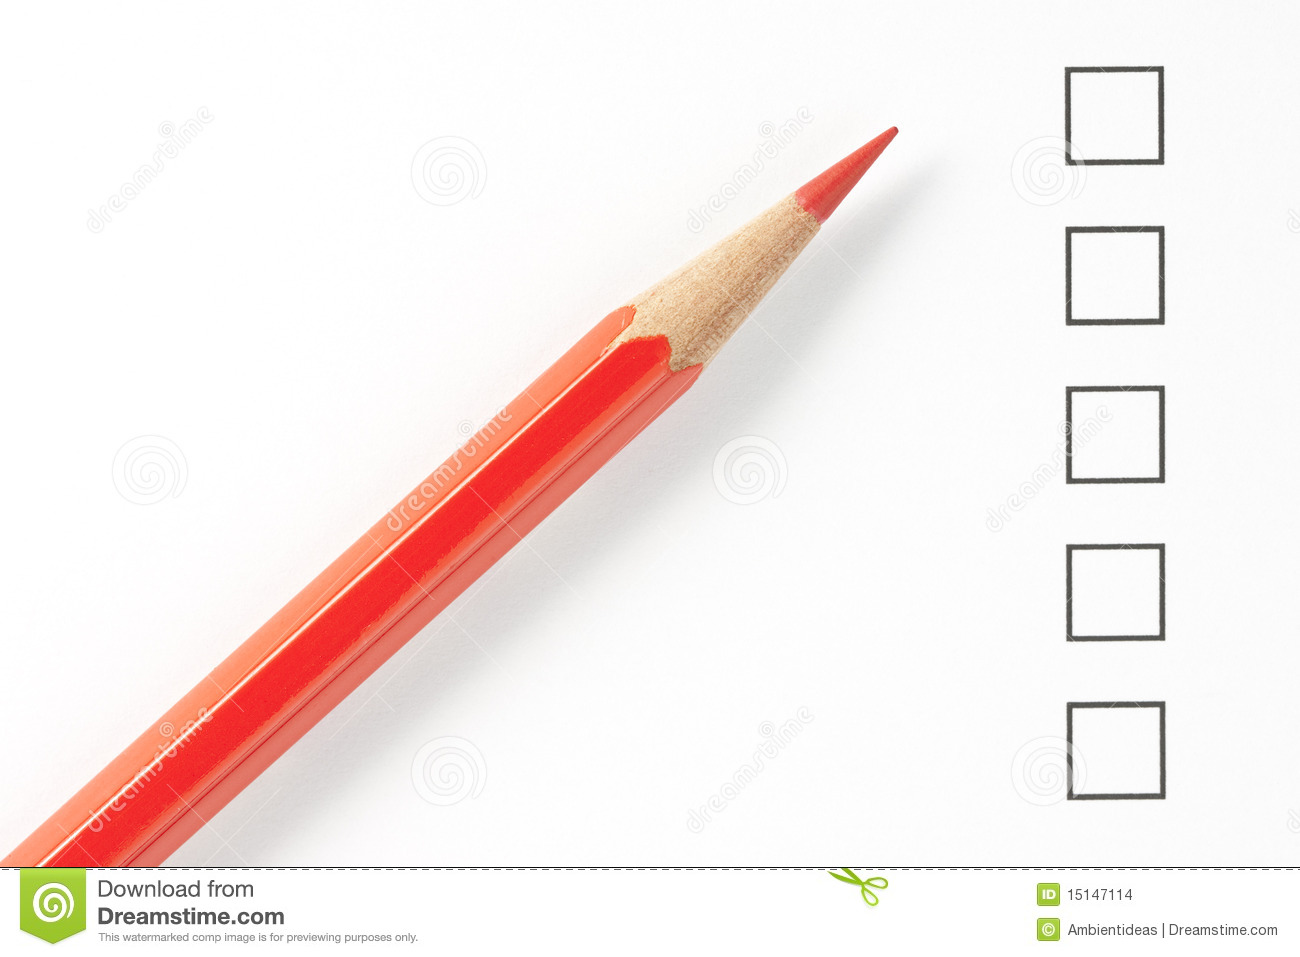 Blank Survey Boxes With Red Pencil Close Up  Focus On Pencil Tip